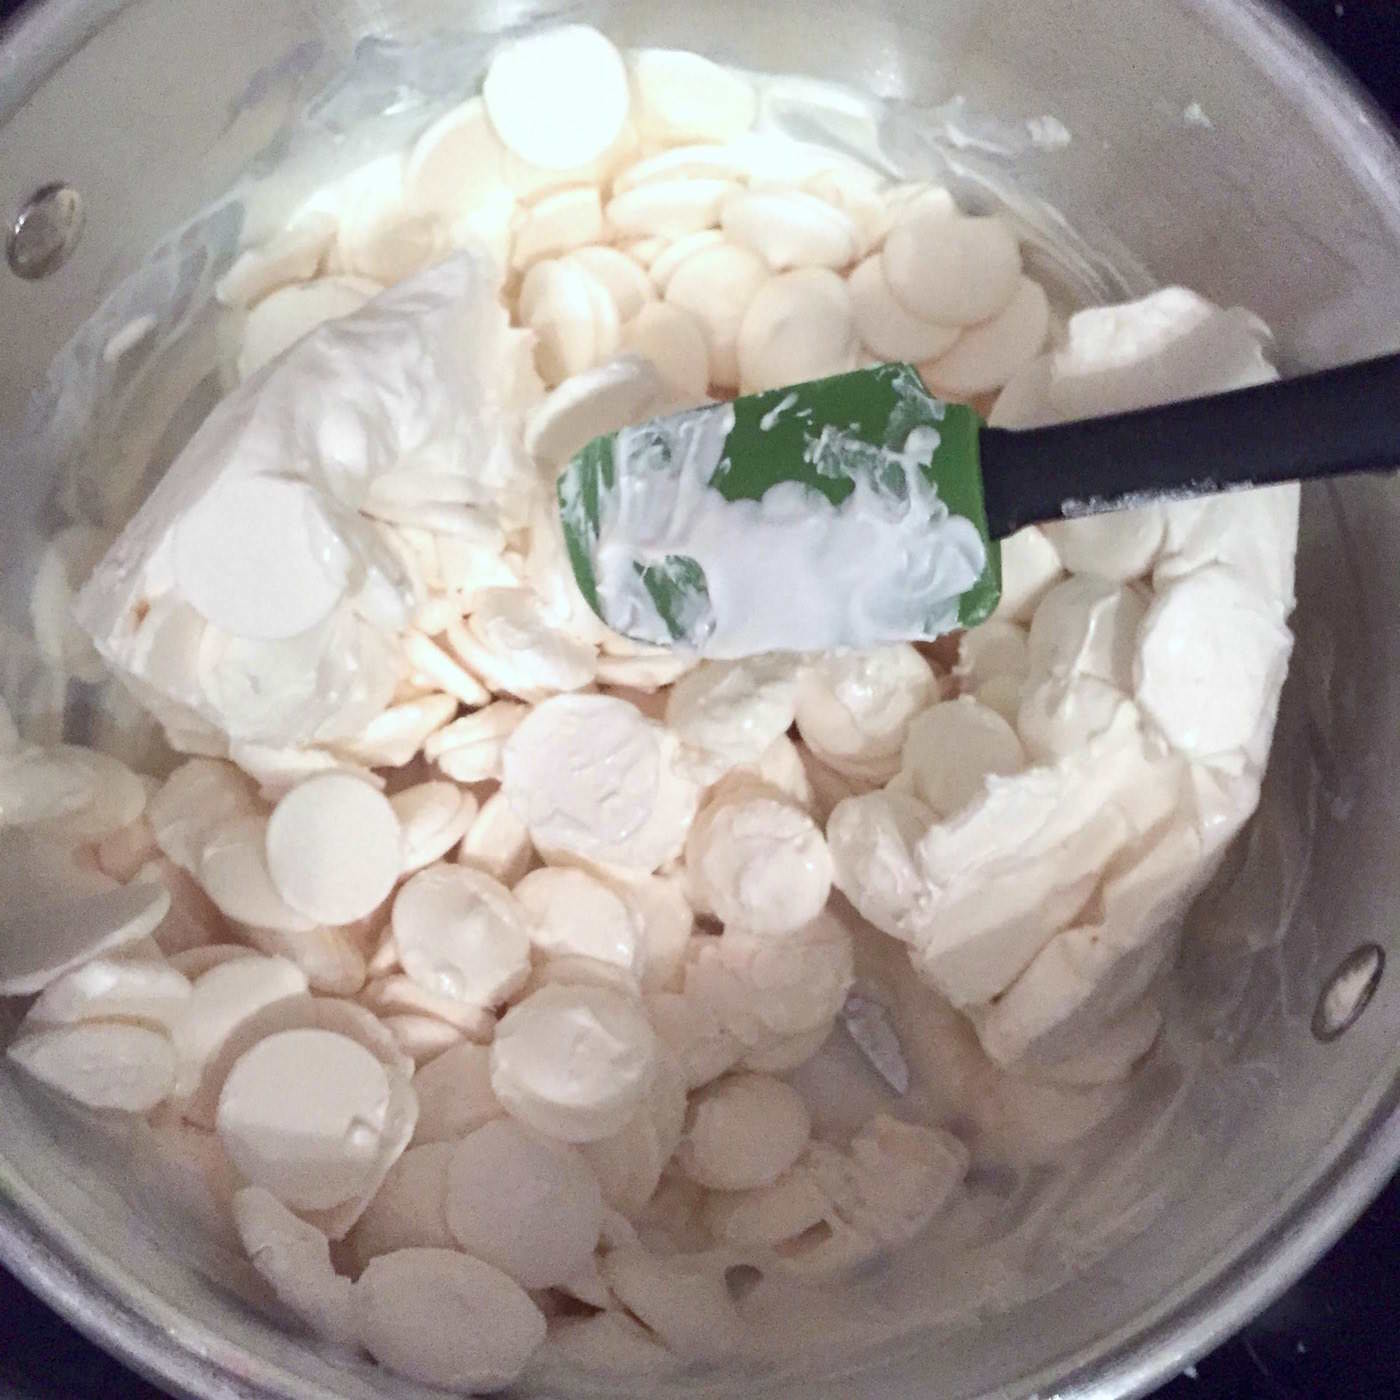 Melting white candy melts in a sauce pan